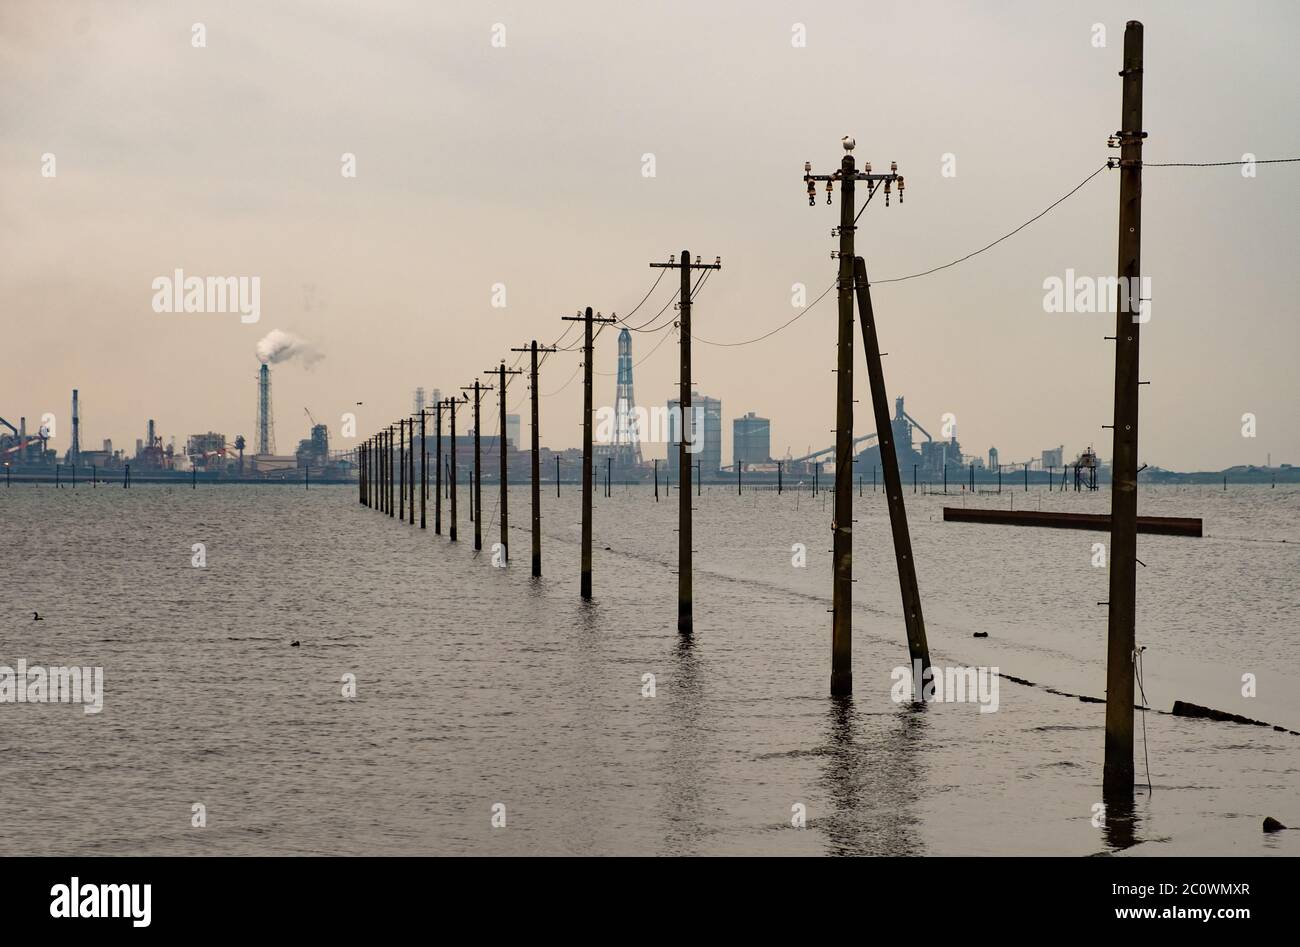 Electric poles in the sea of the Tokyo Bay coast, Japan. Stock Photo